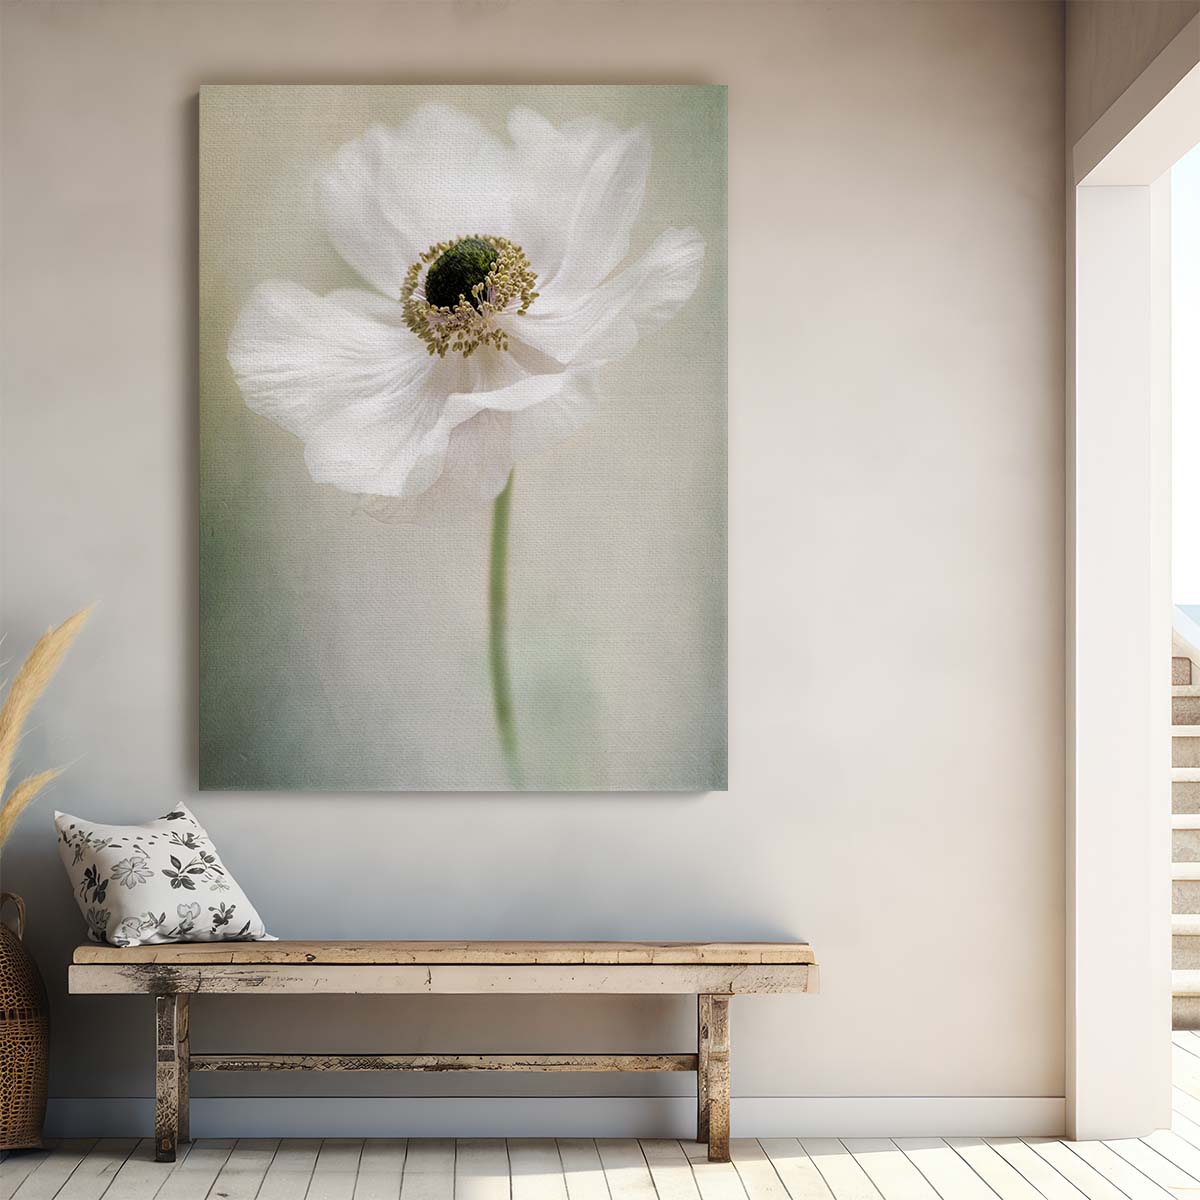 Spring Blossom Macro Photography - Jacky Parker's Anemone Windflower Close-Up by Luxuriance Designs, made in USA